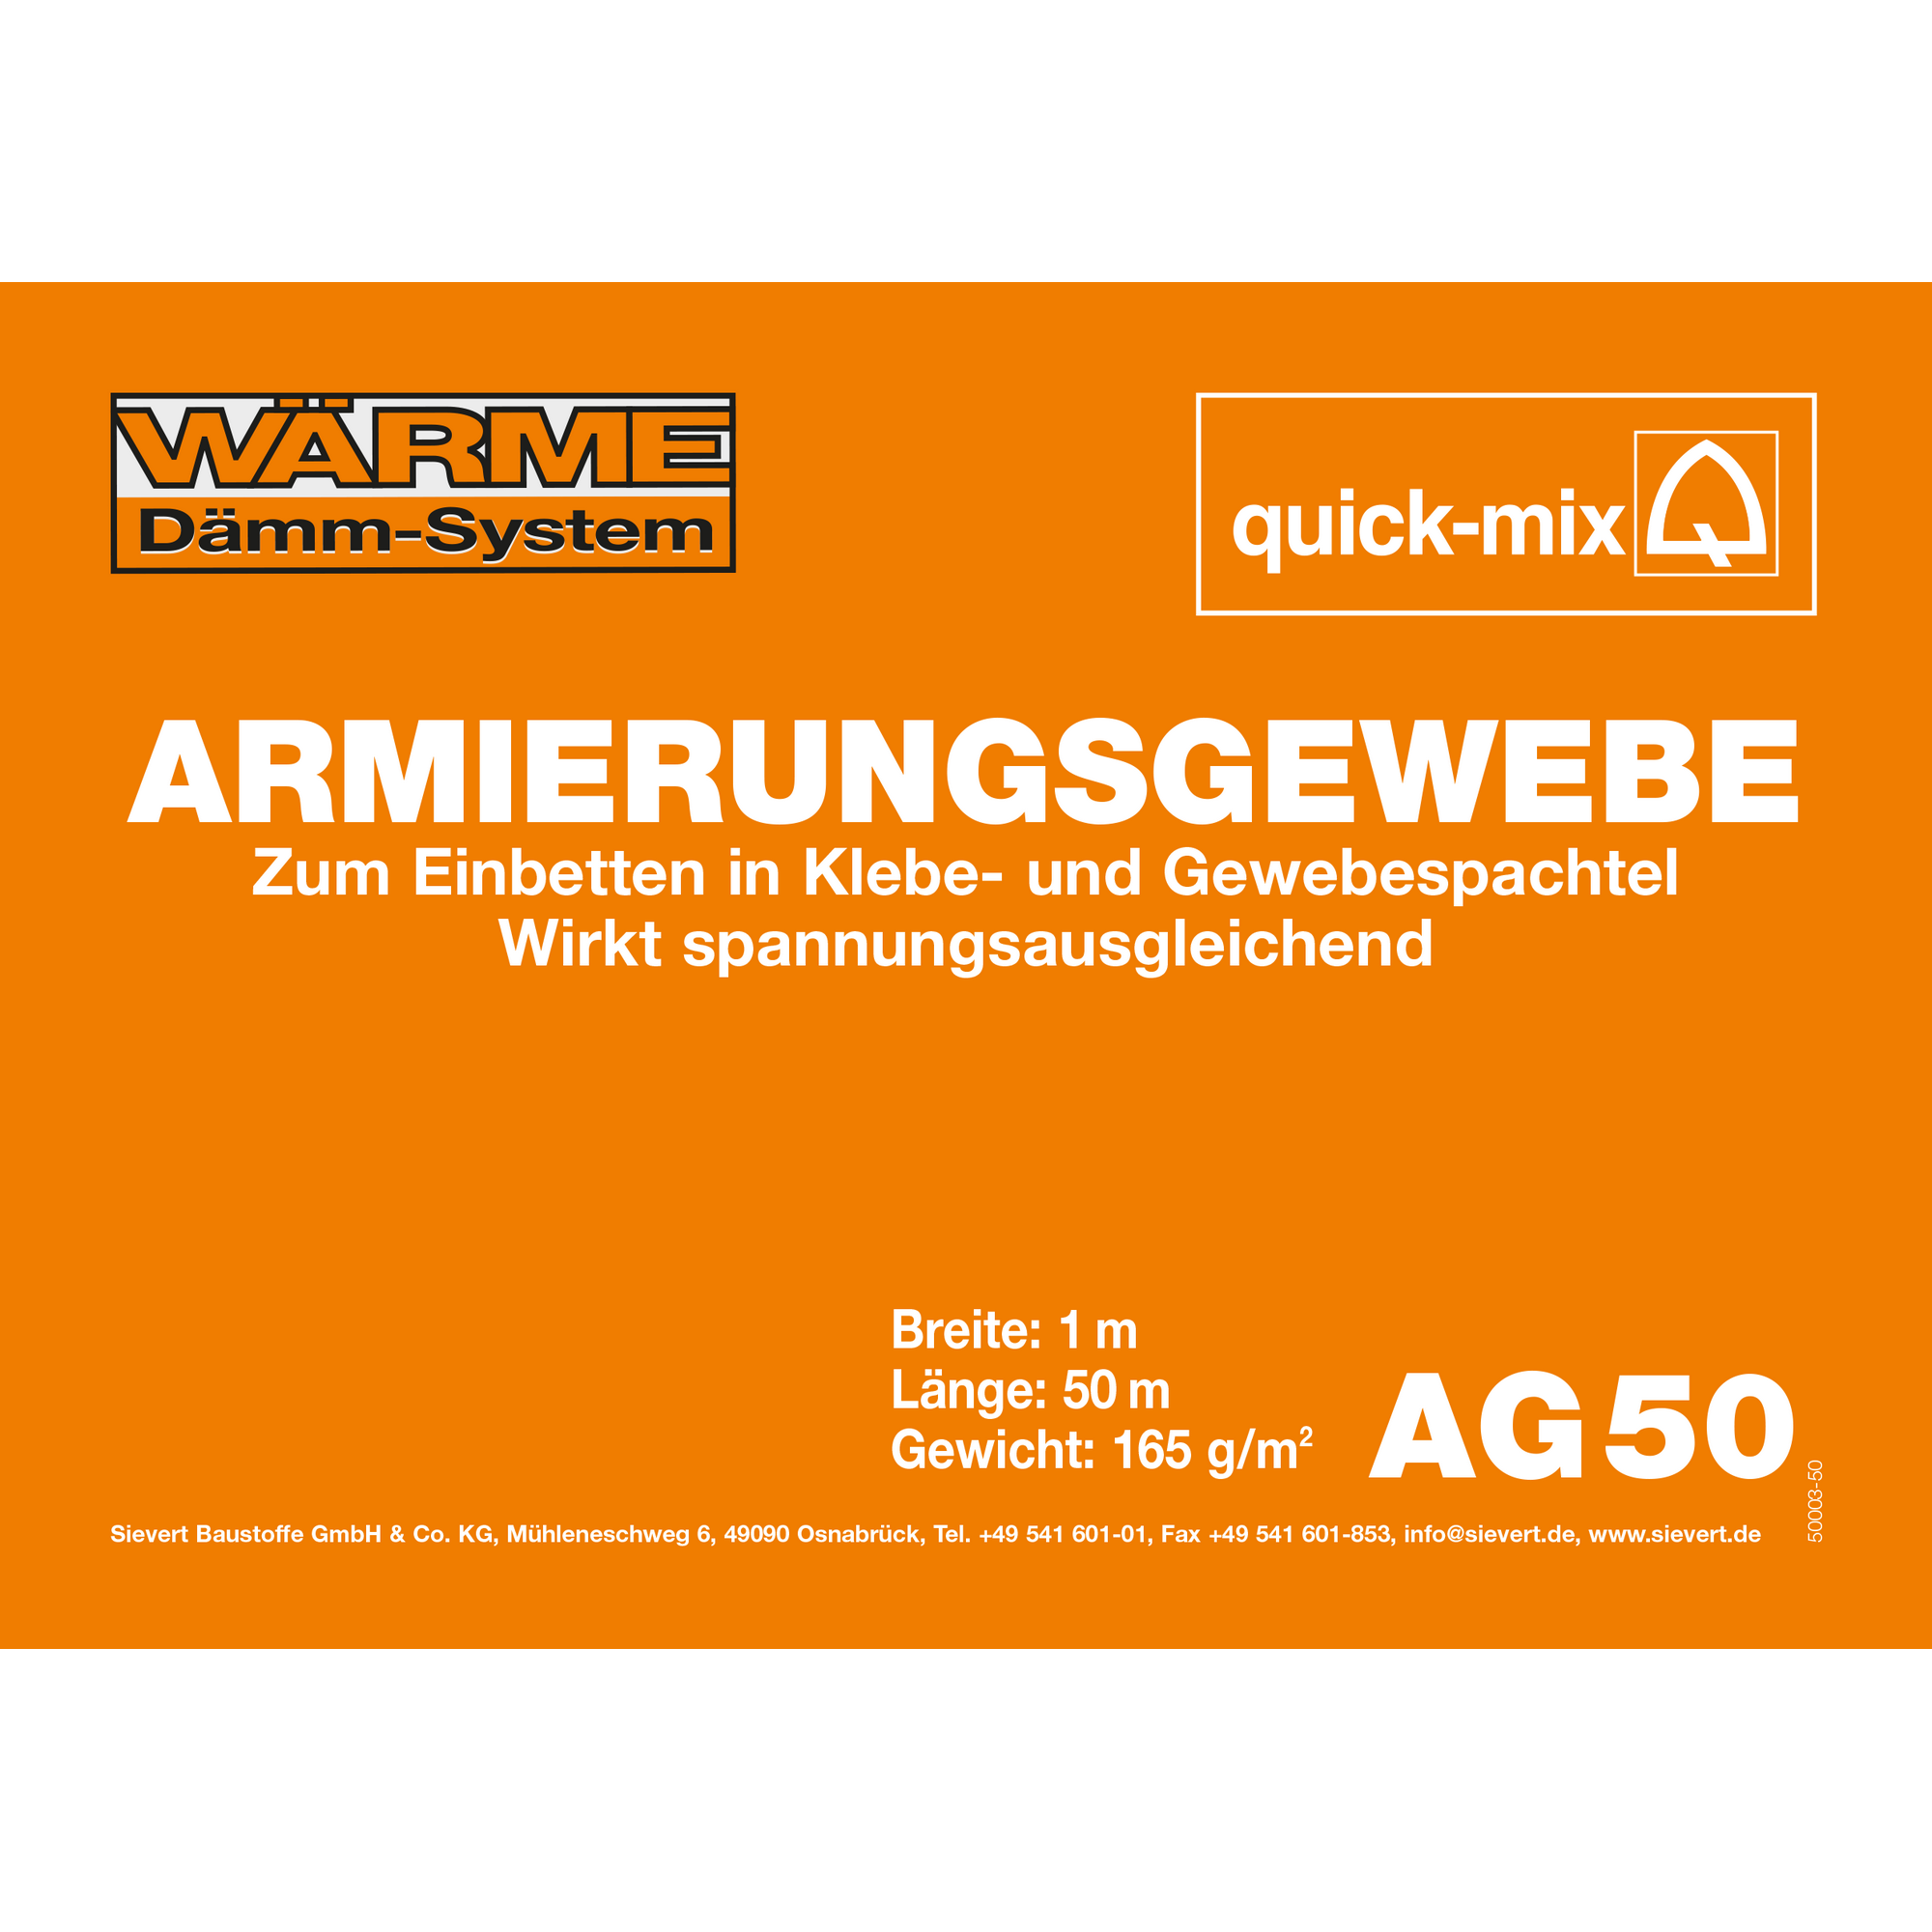 Armierungsgewebe + product picture